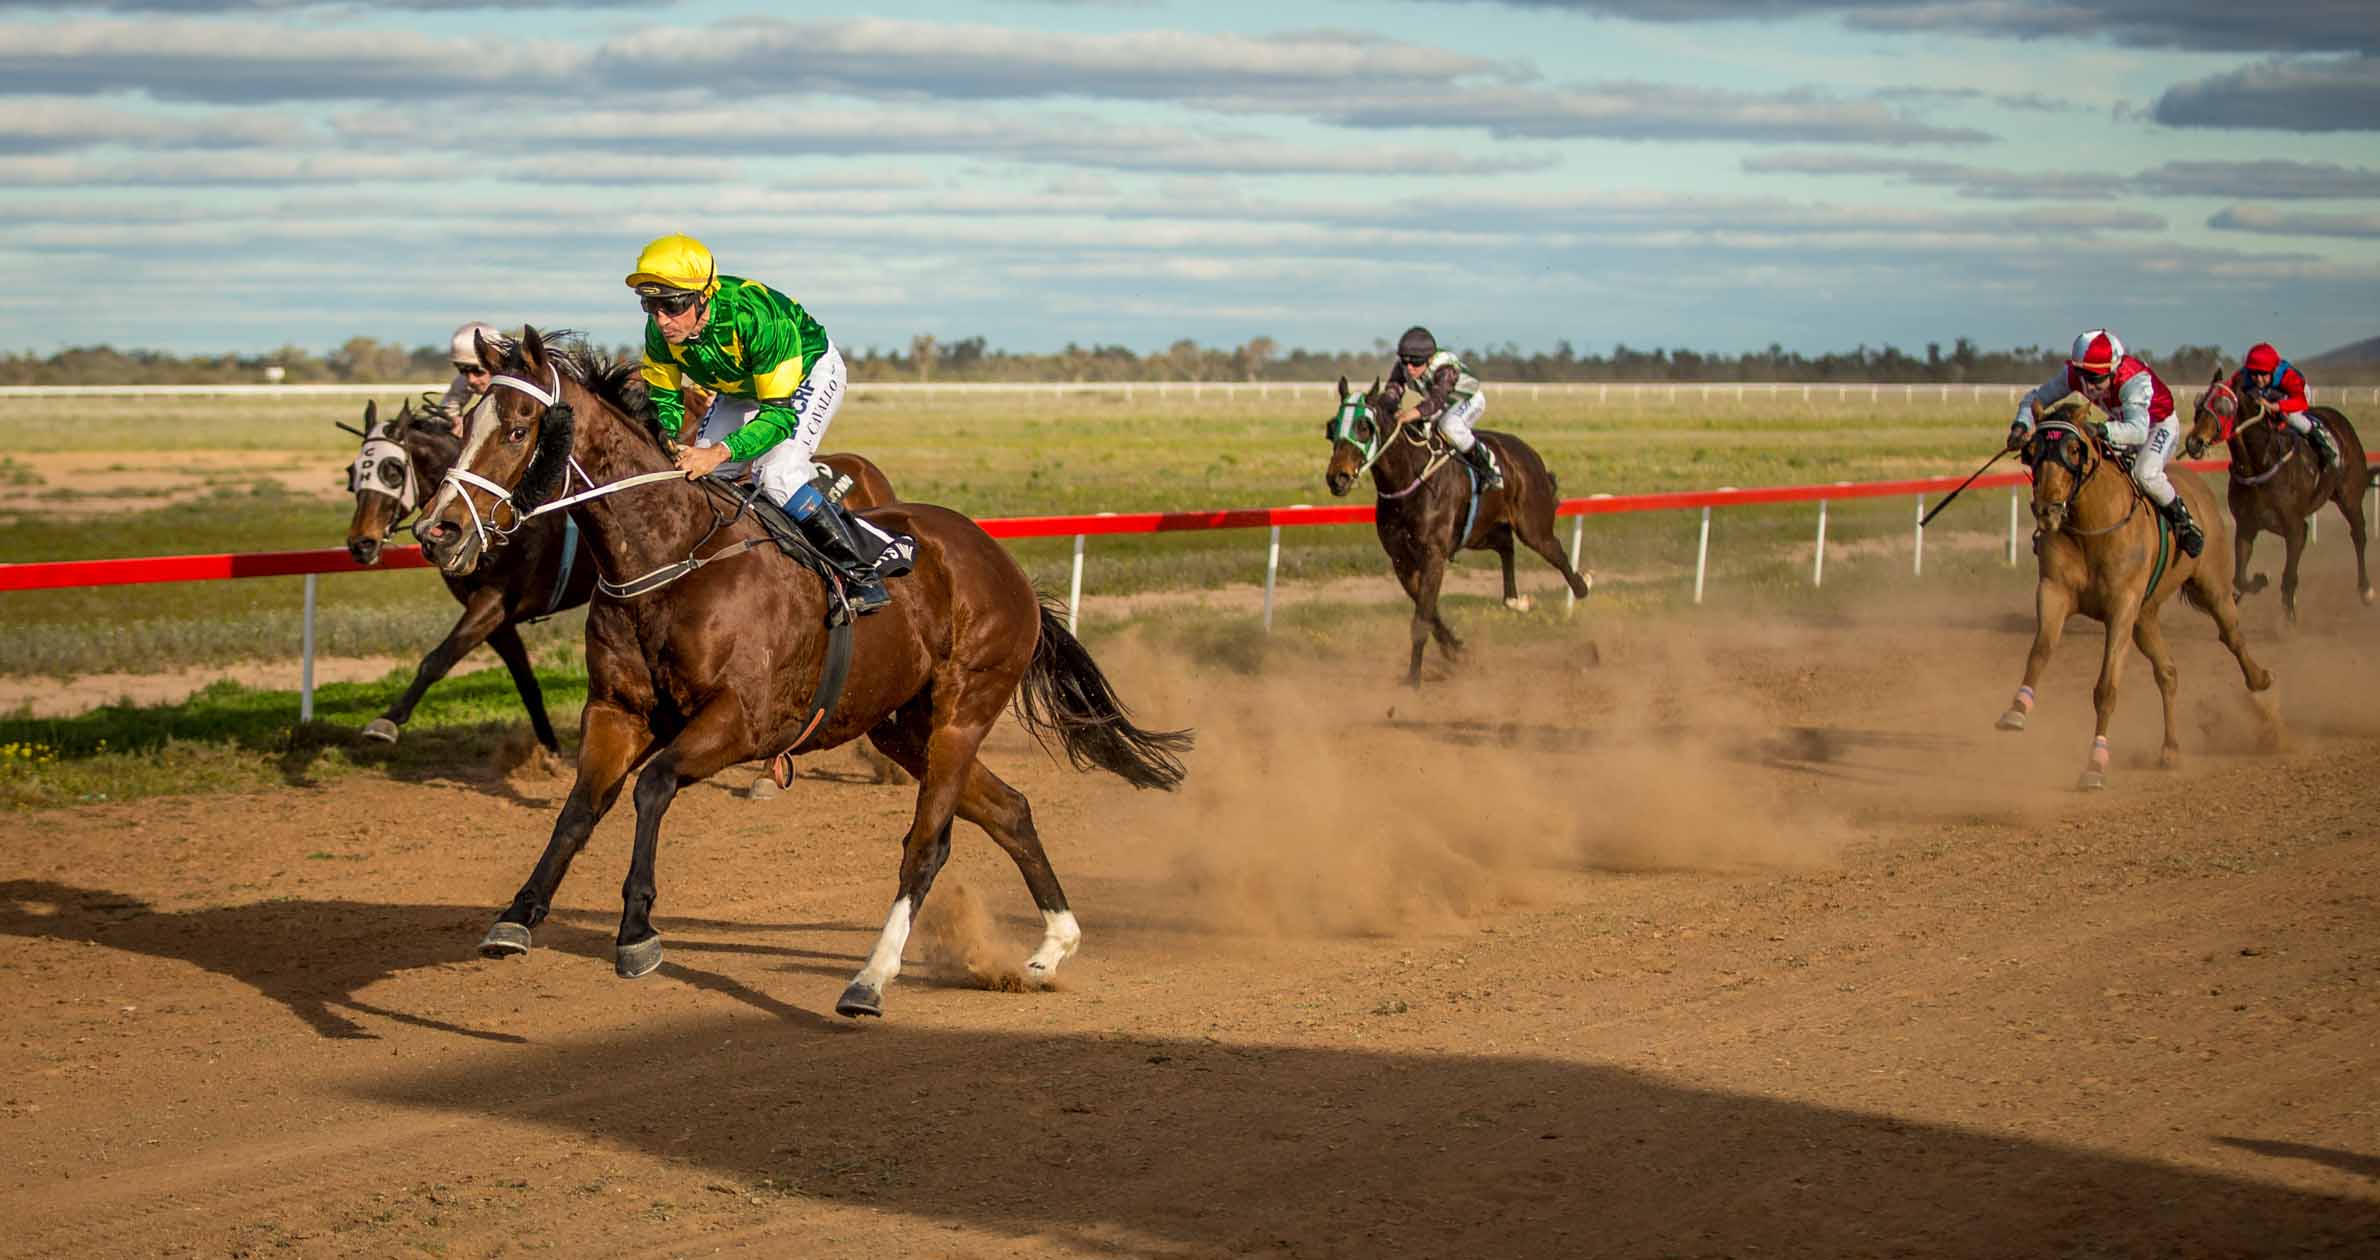 Sydney jockey Tony Cauallo aboard Dark Mojo for their win in the Landmark Walsh Hughes (Bourke) and Landmark Russell (Cobar) Louth Cup on Saturday at the Louth Races. ▪ Photo courtesy Janian McMillan (www.racingphotography.com.au) 